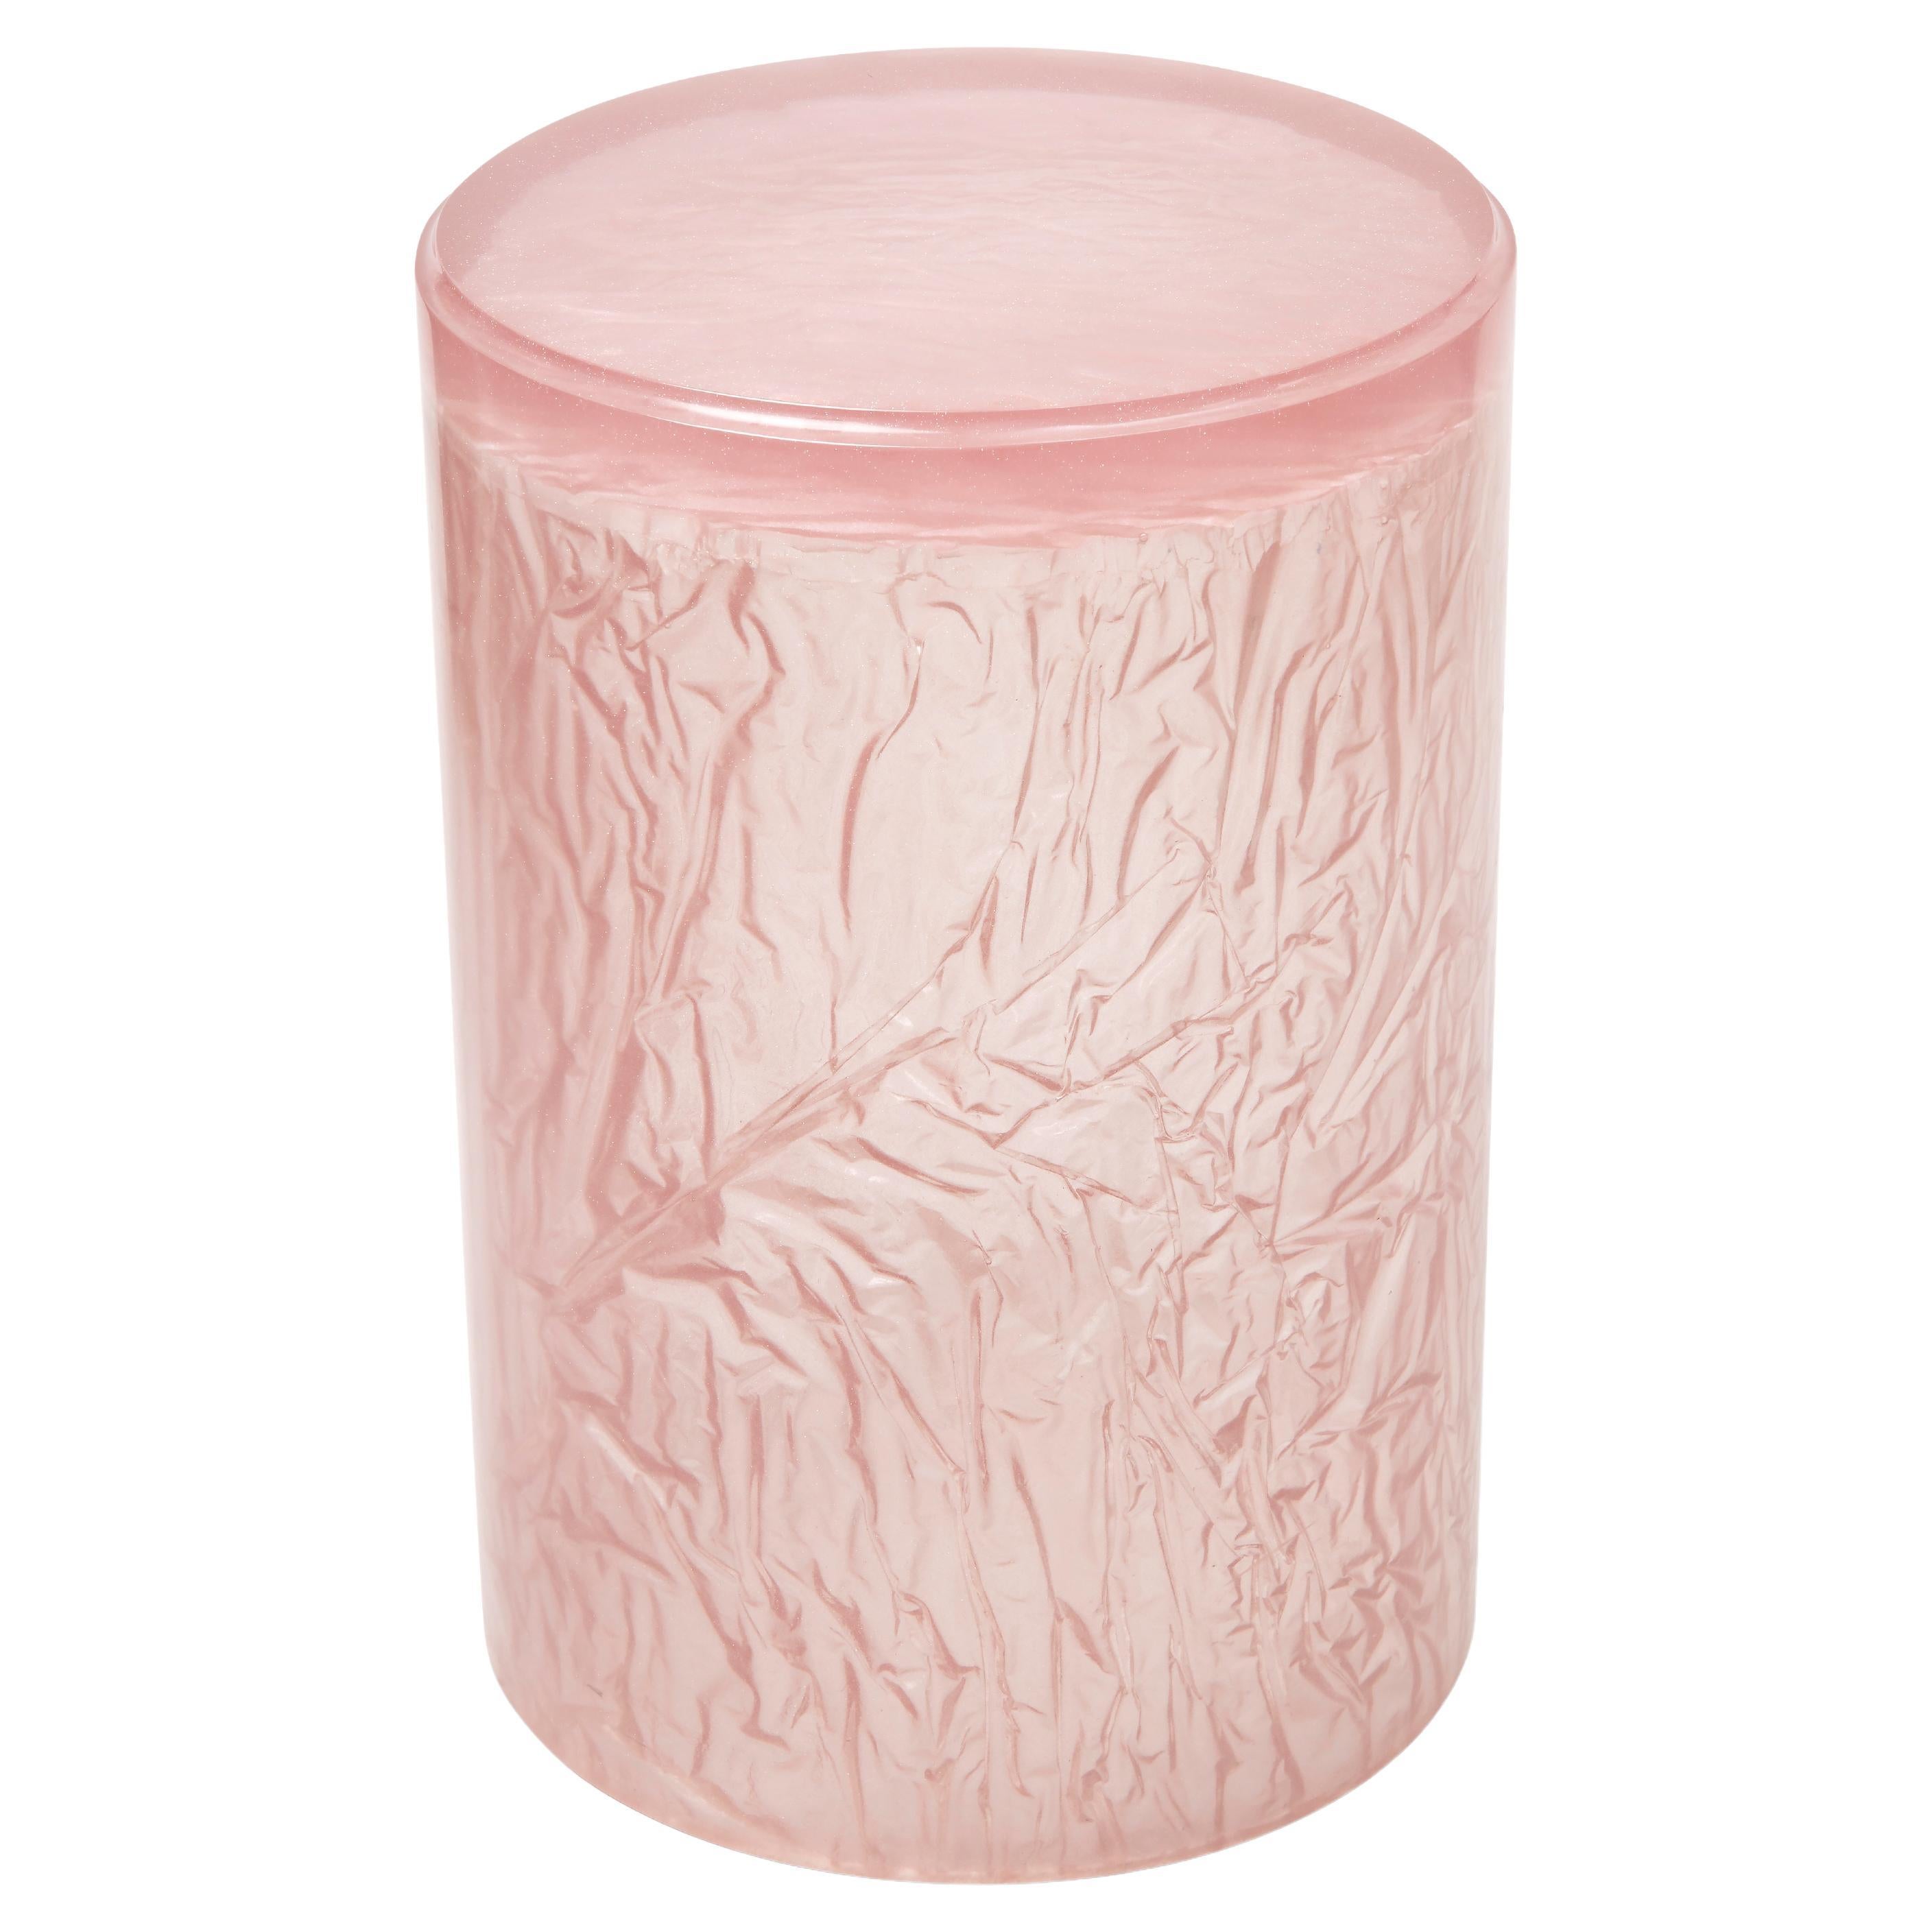 Contemporary Resin Acrylic Side Table or Stool by Natalie Tredgett, gloss, Pink